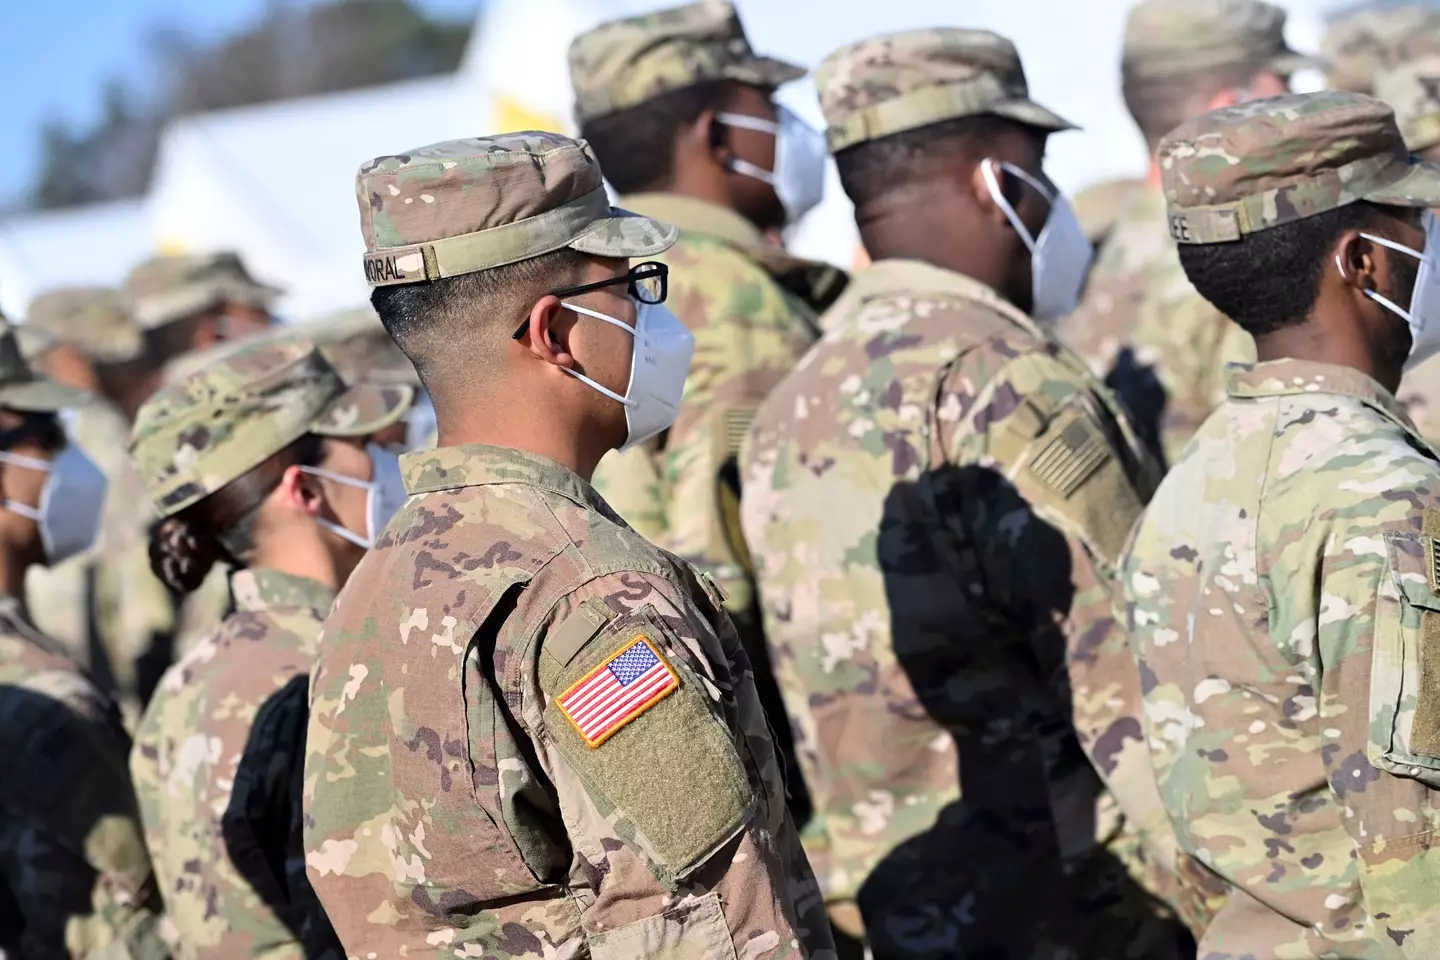 Soldiers in the US army will now be allowed to have tattoos on the back of their necks.